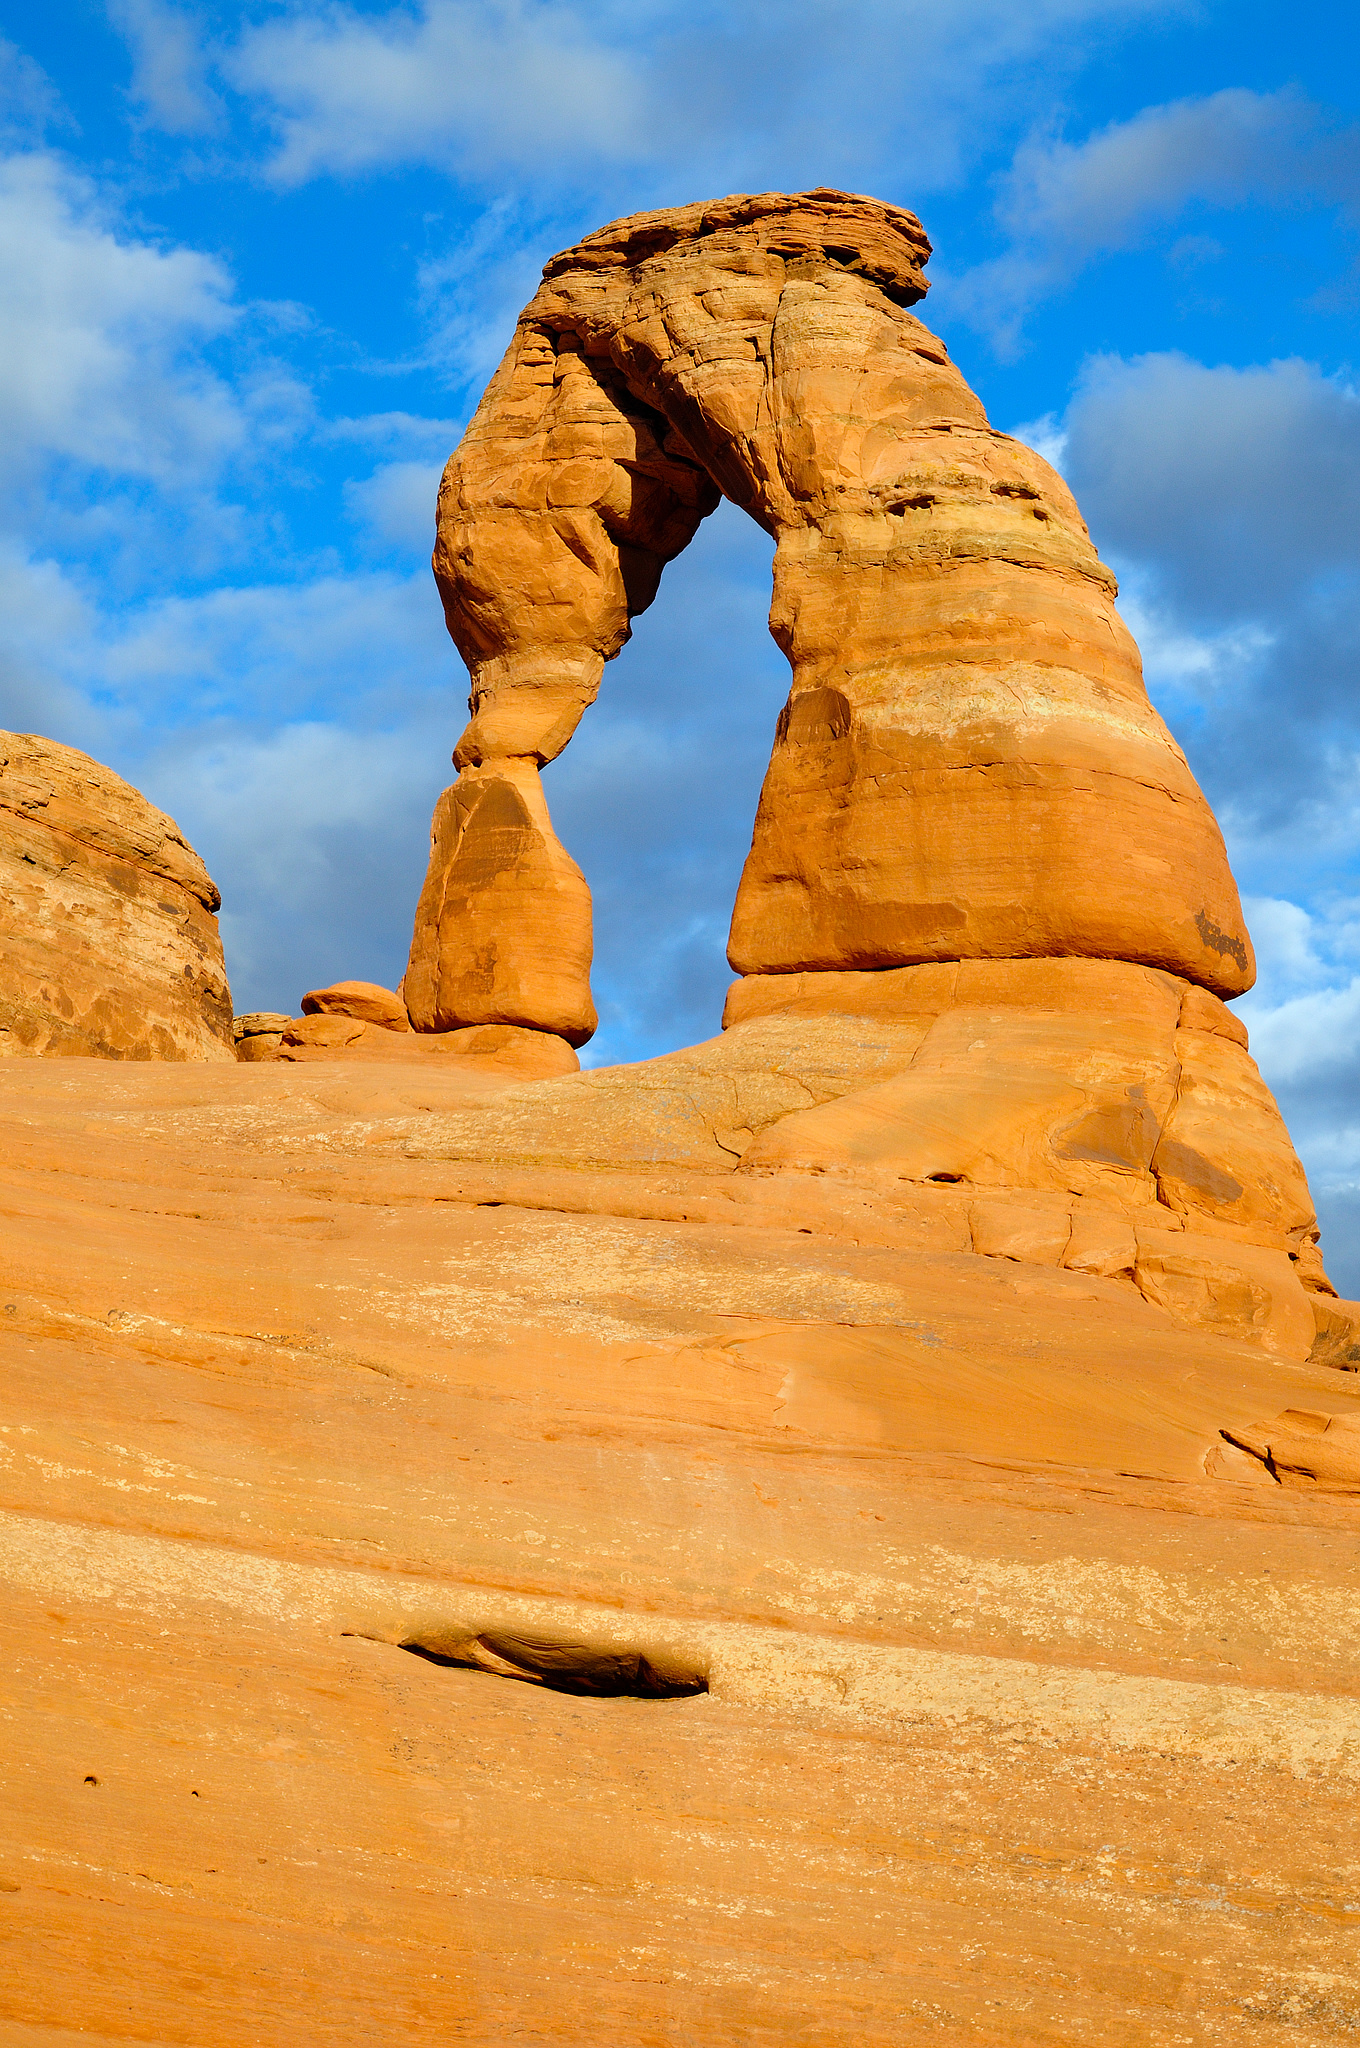 
        <div class='title'>
          Delicate Arch
        </div>
       
        <div class='description'>
          Delicate Arch is bathed in afternoon sun from this view in the bowl below the arch in Arches National Park
        </div>
      